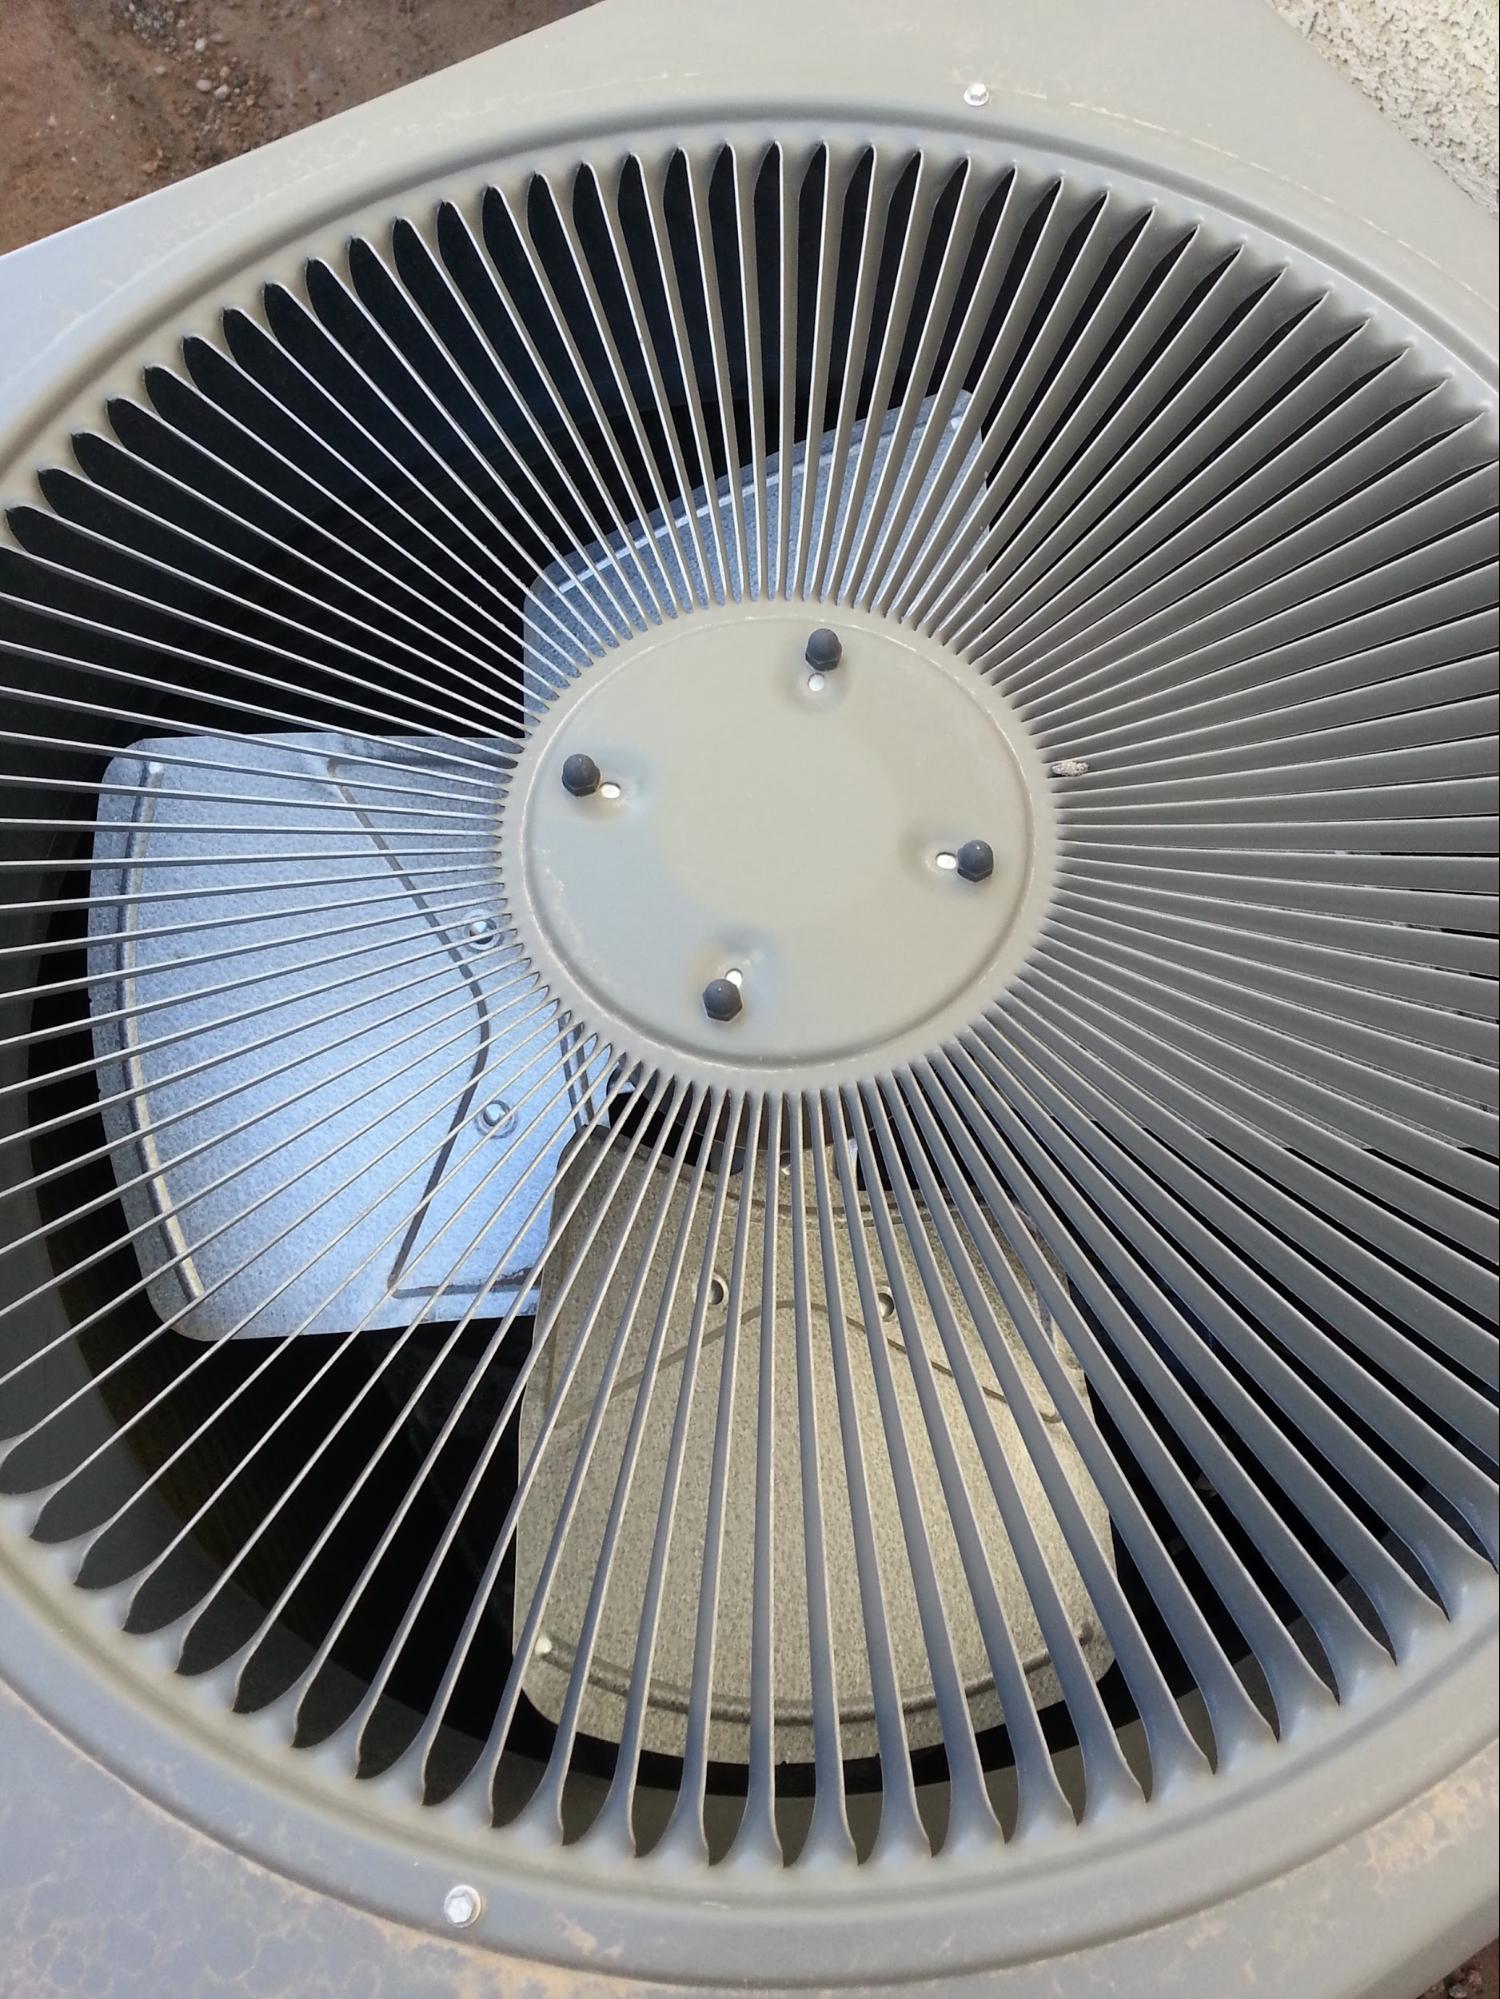 The fan inside your condenser